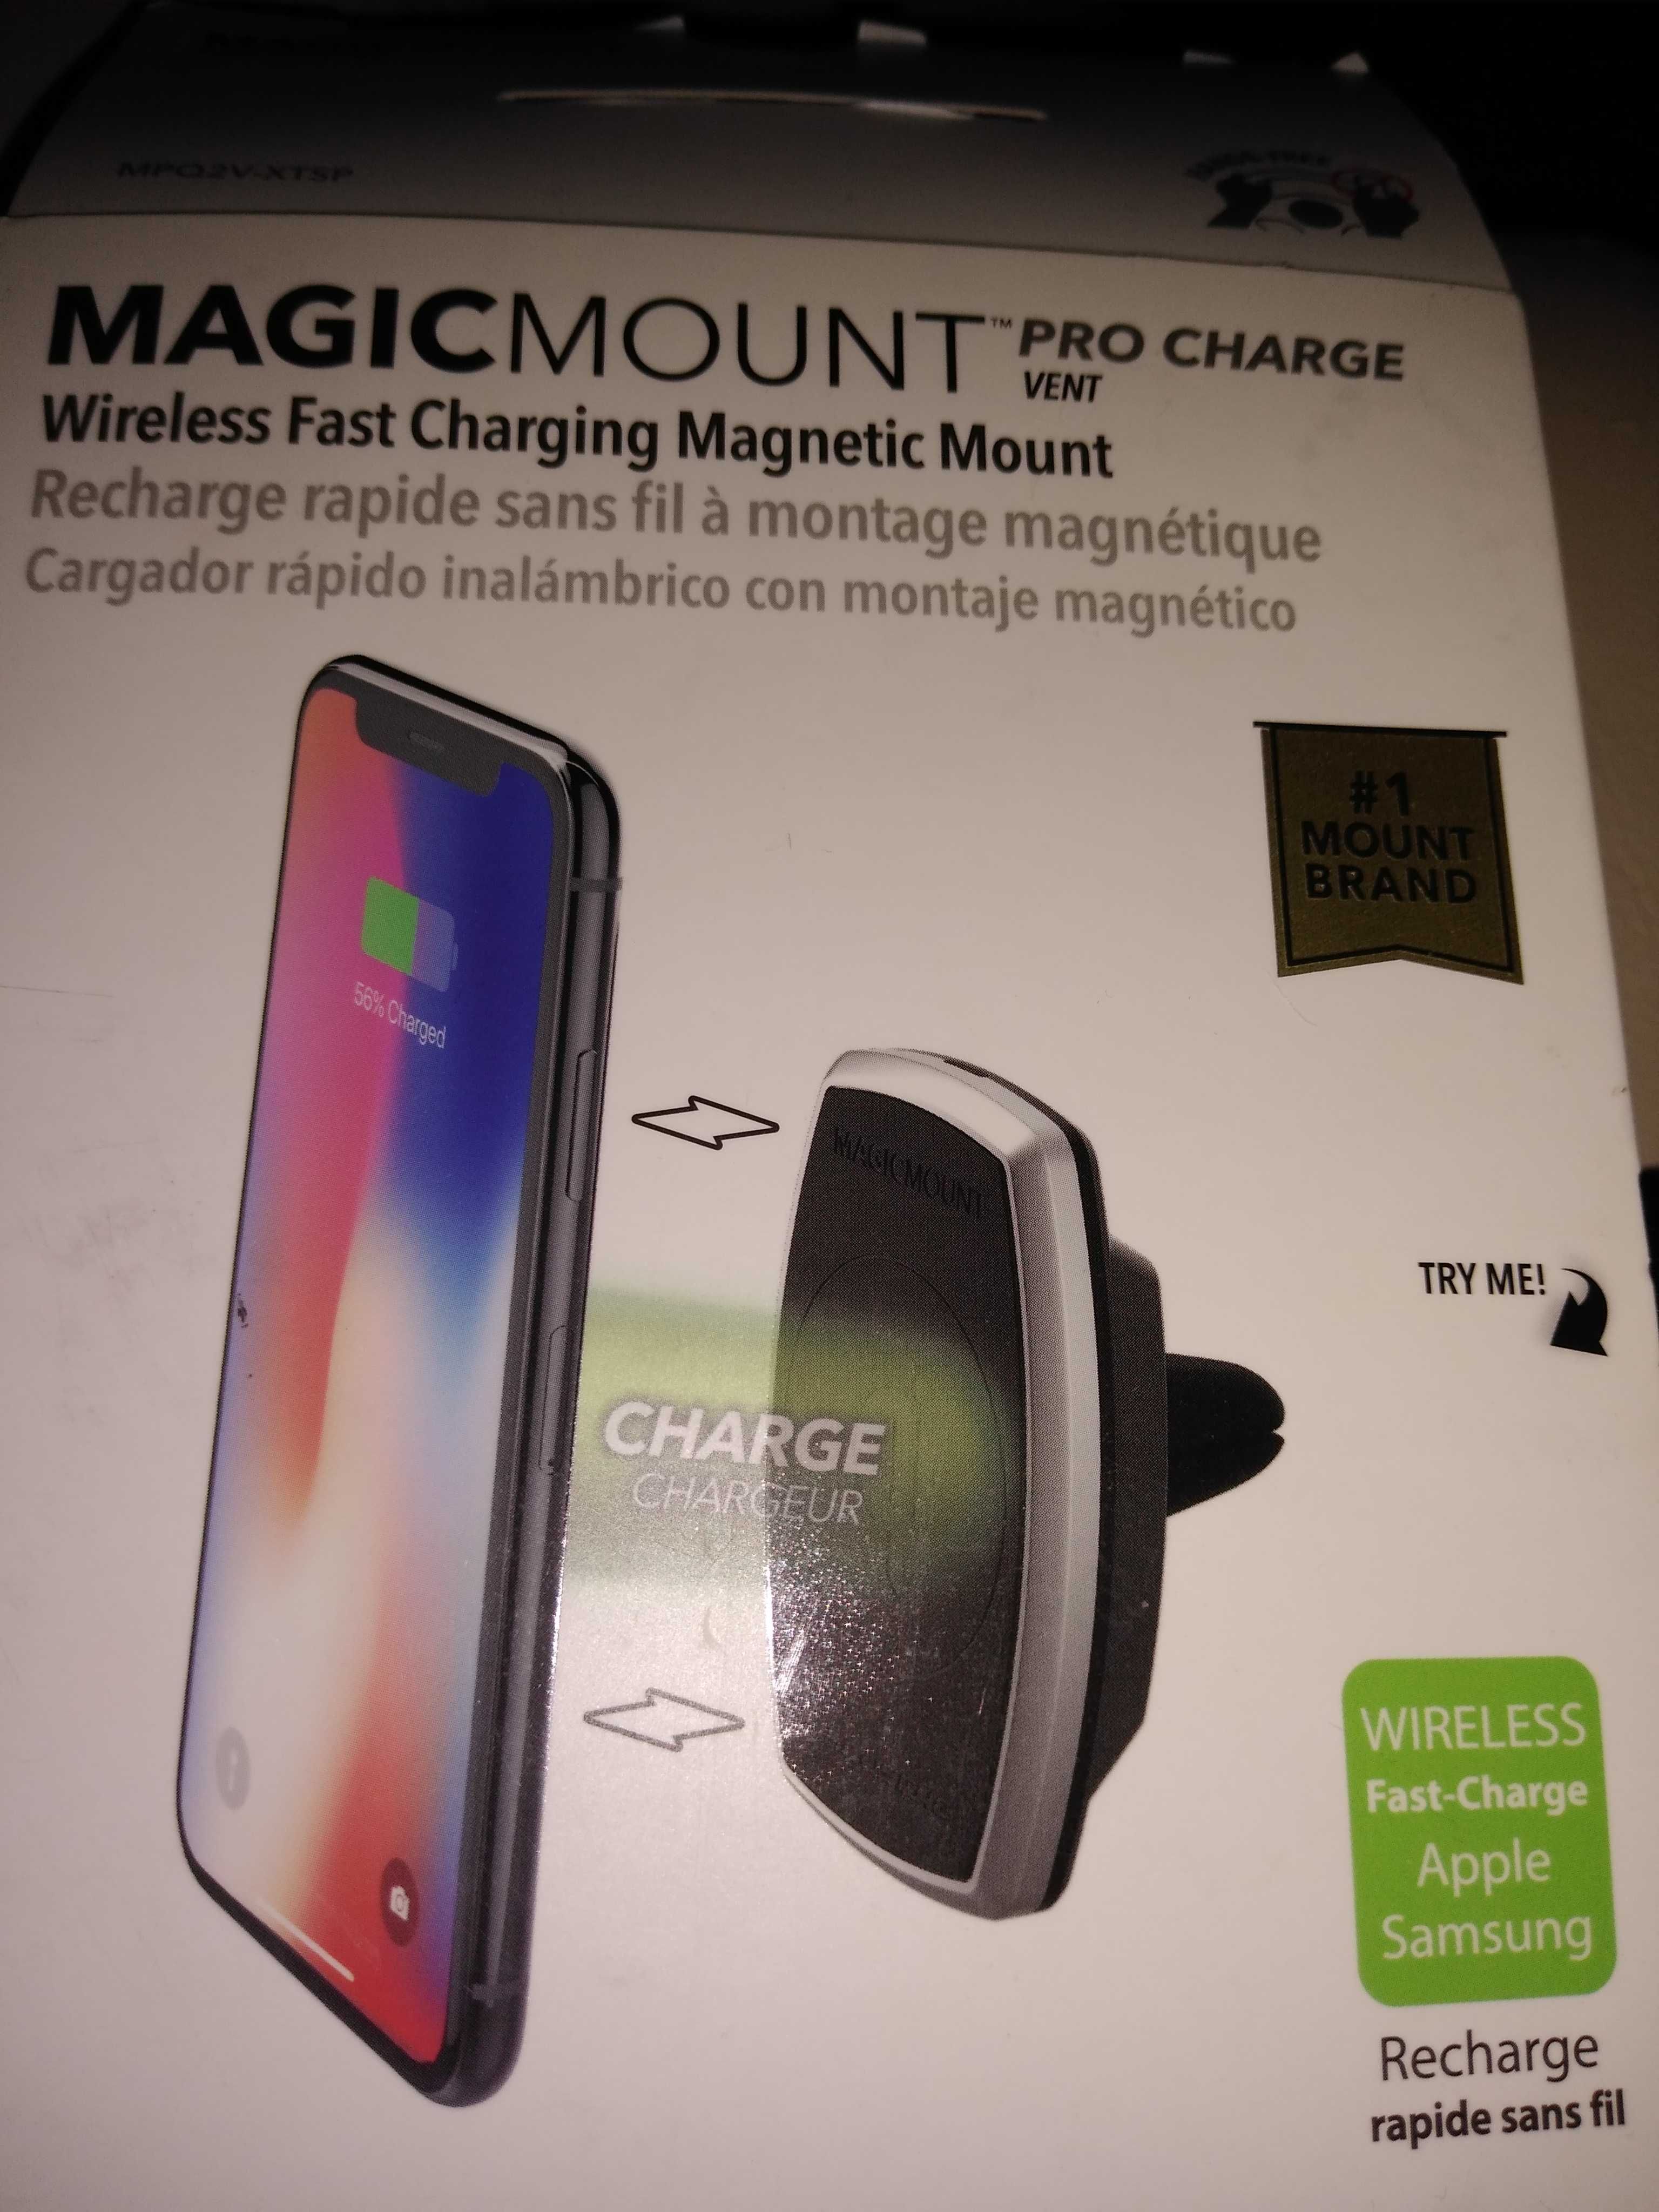 MAGICMOUNT Pro Charge vent